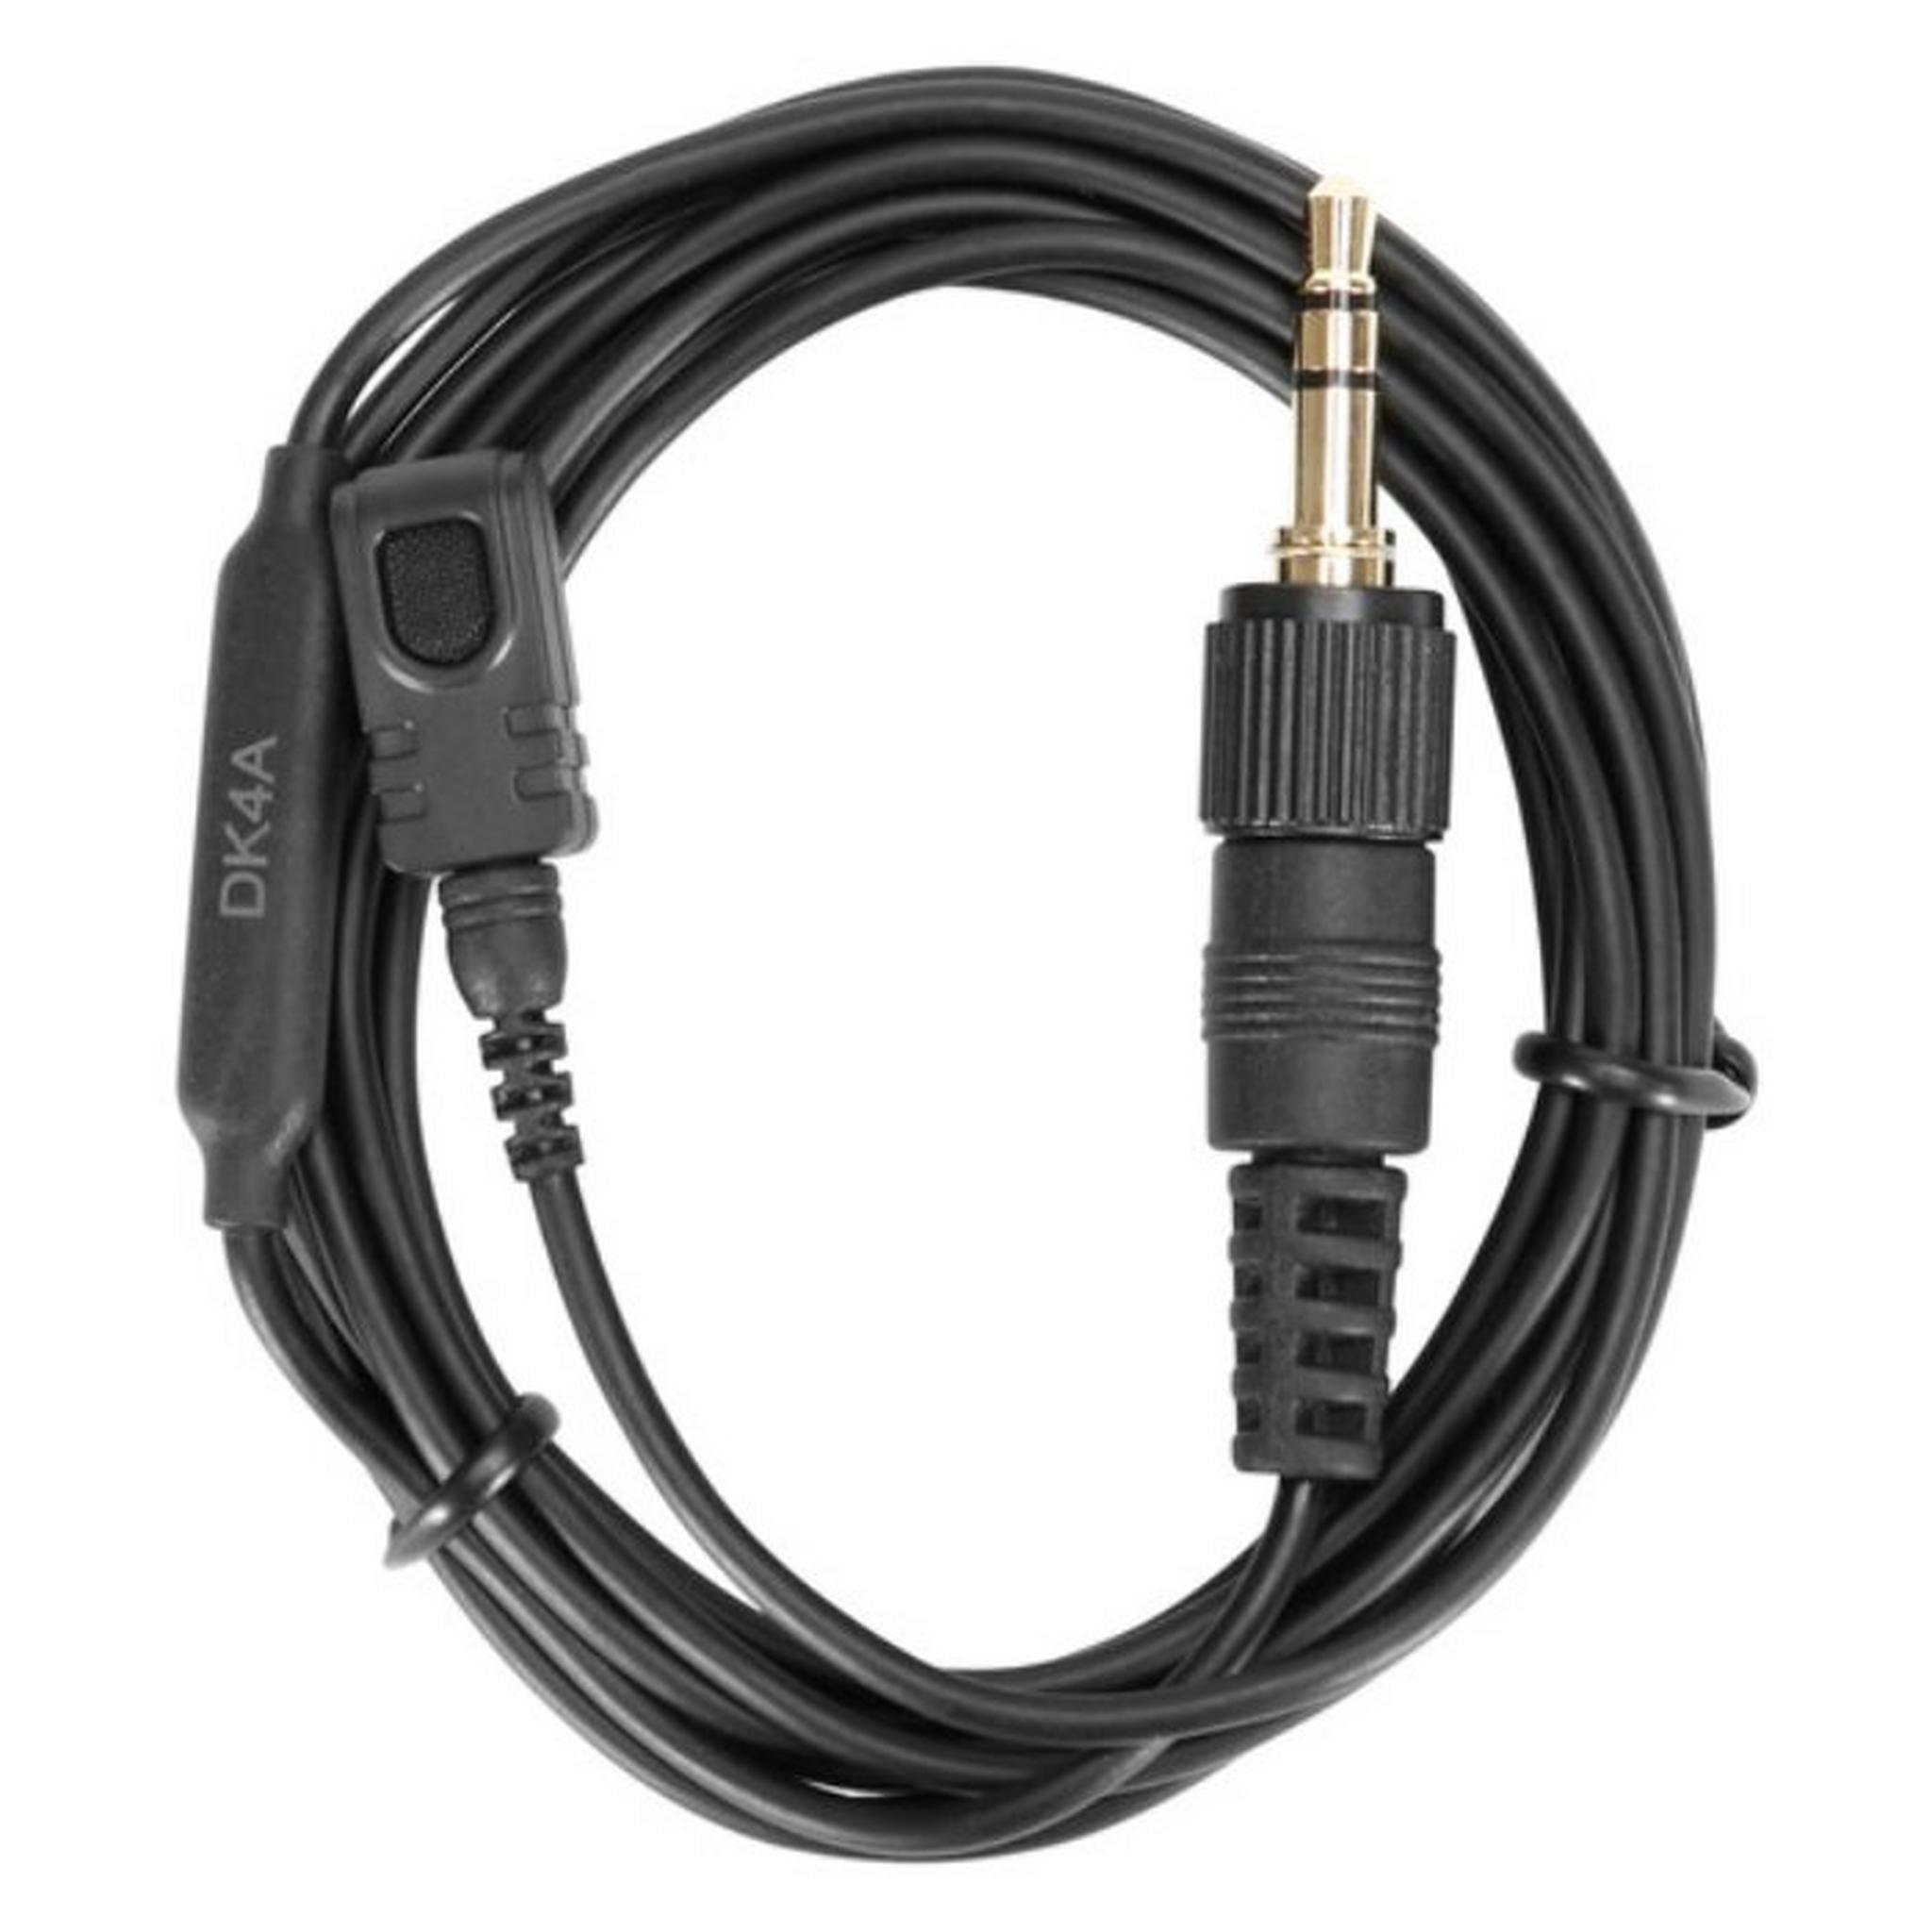 Saramonic Professional Microphone 3.5mm TRS Connector (DK4A)